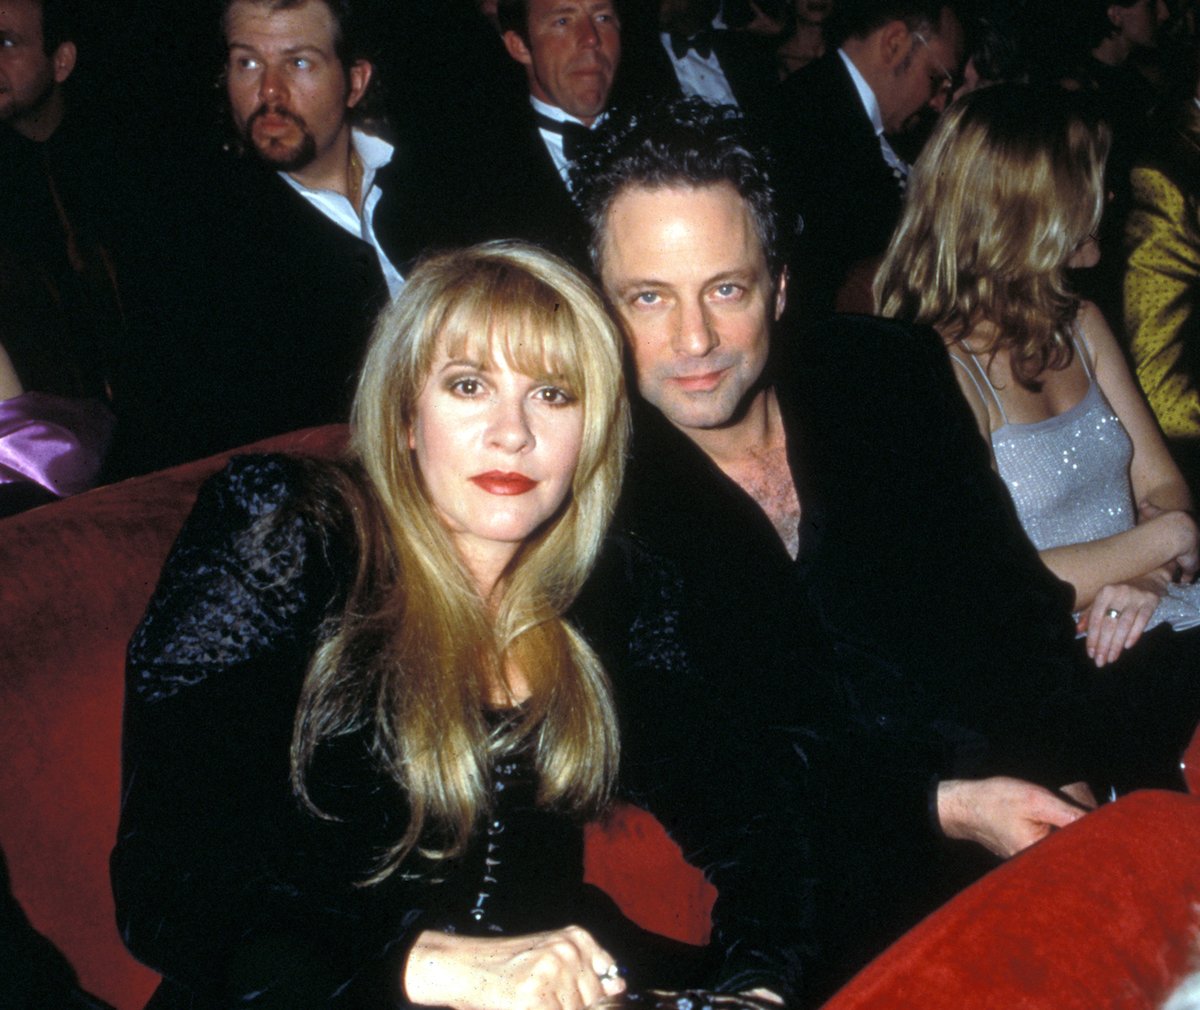 Stevie Nicks and Lindsey Buckingham sit together at an event.